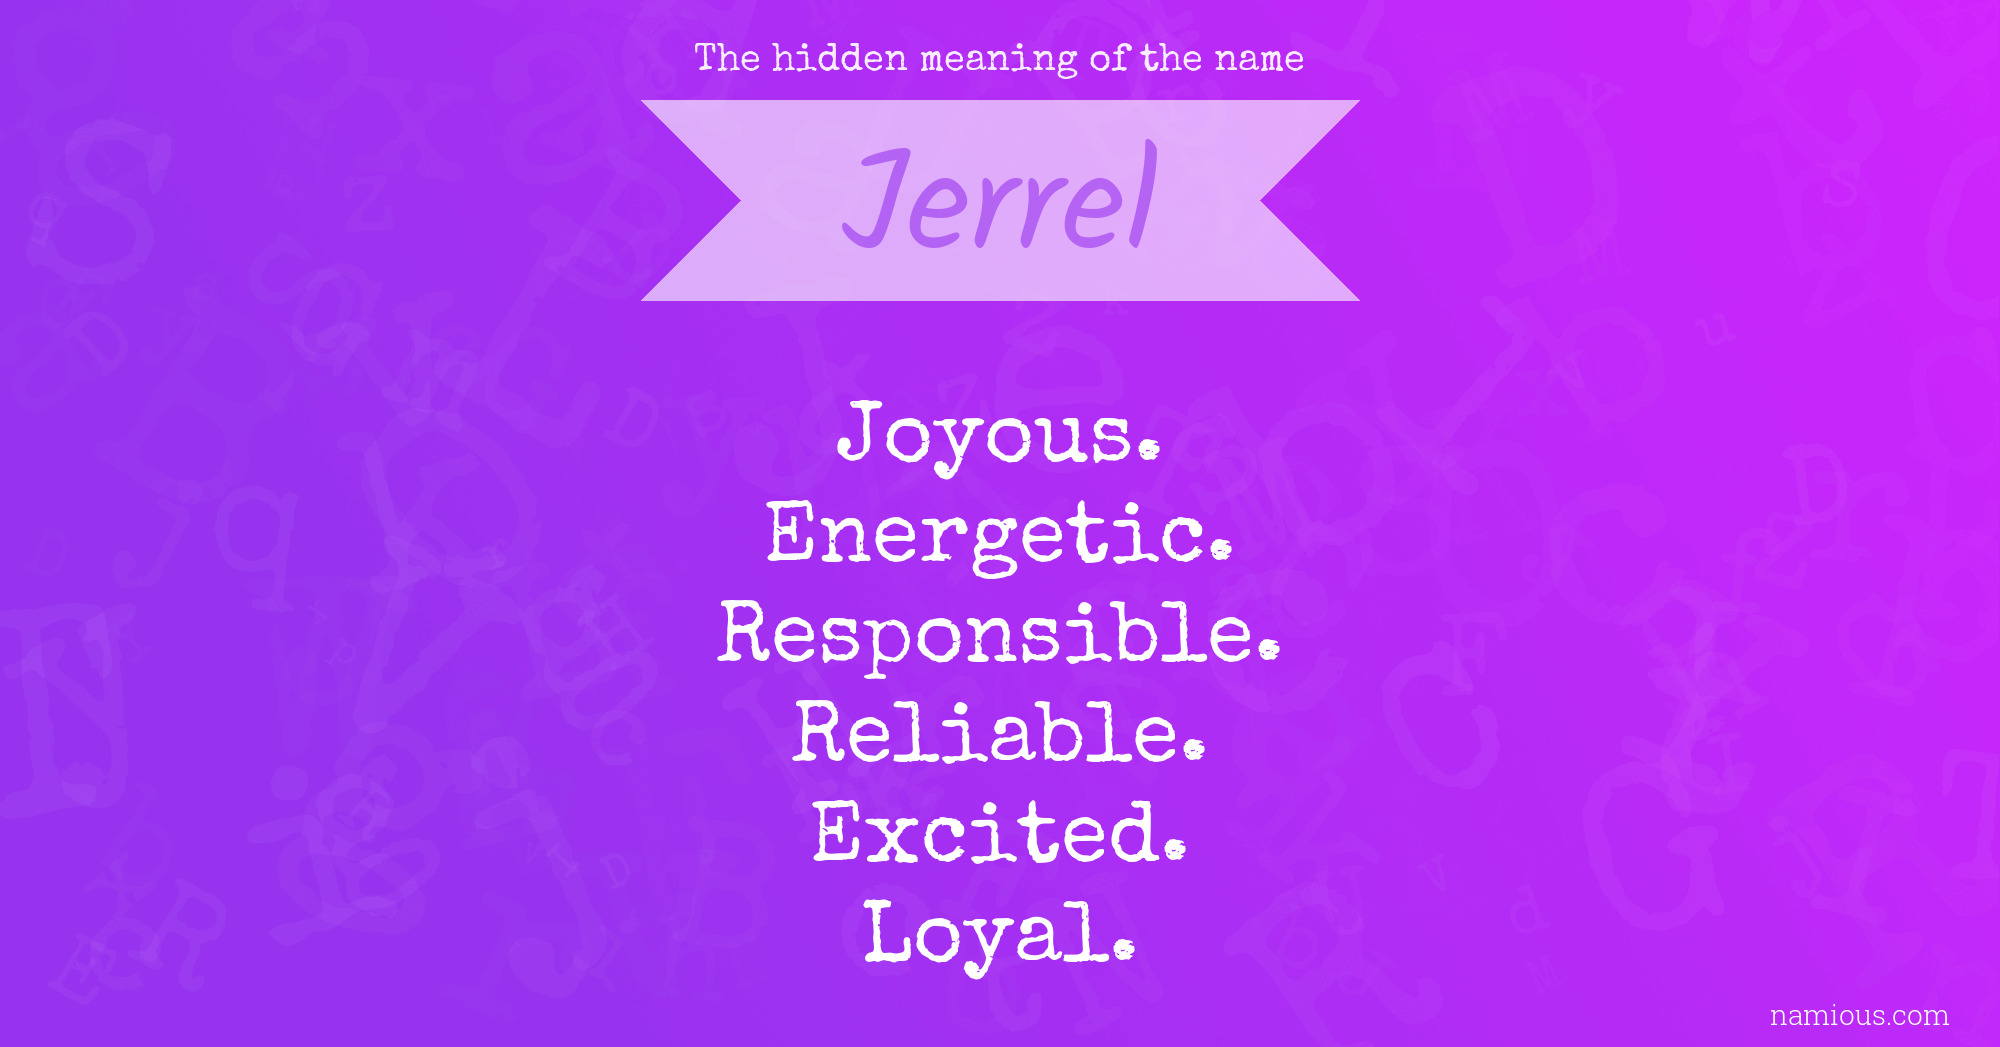 The hidden meaning of the name Jerrel